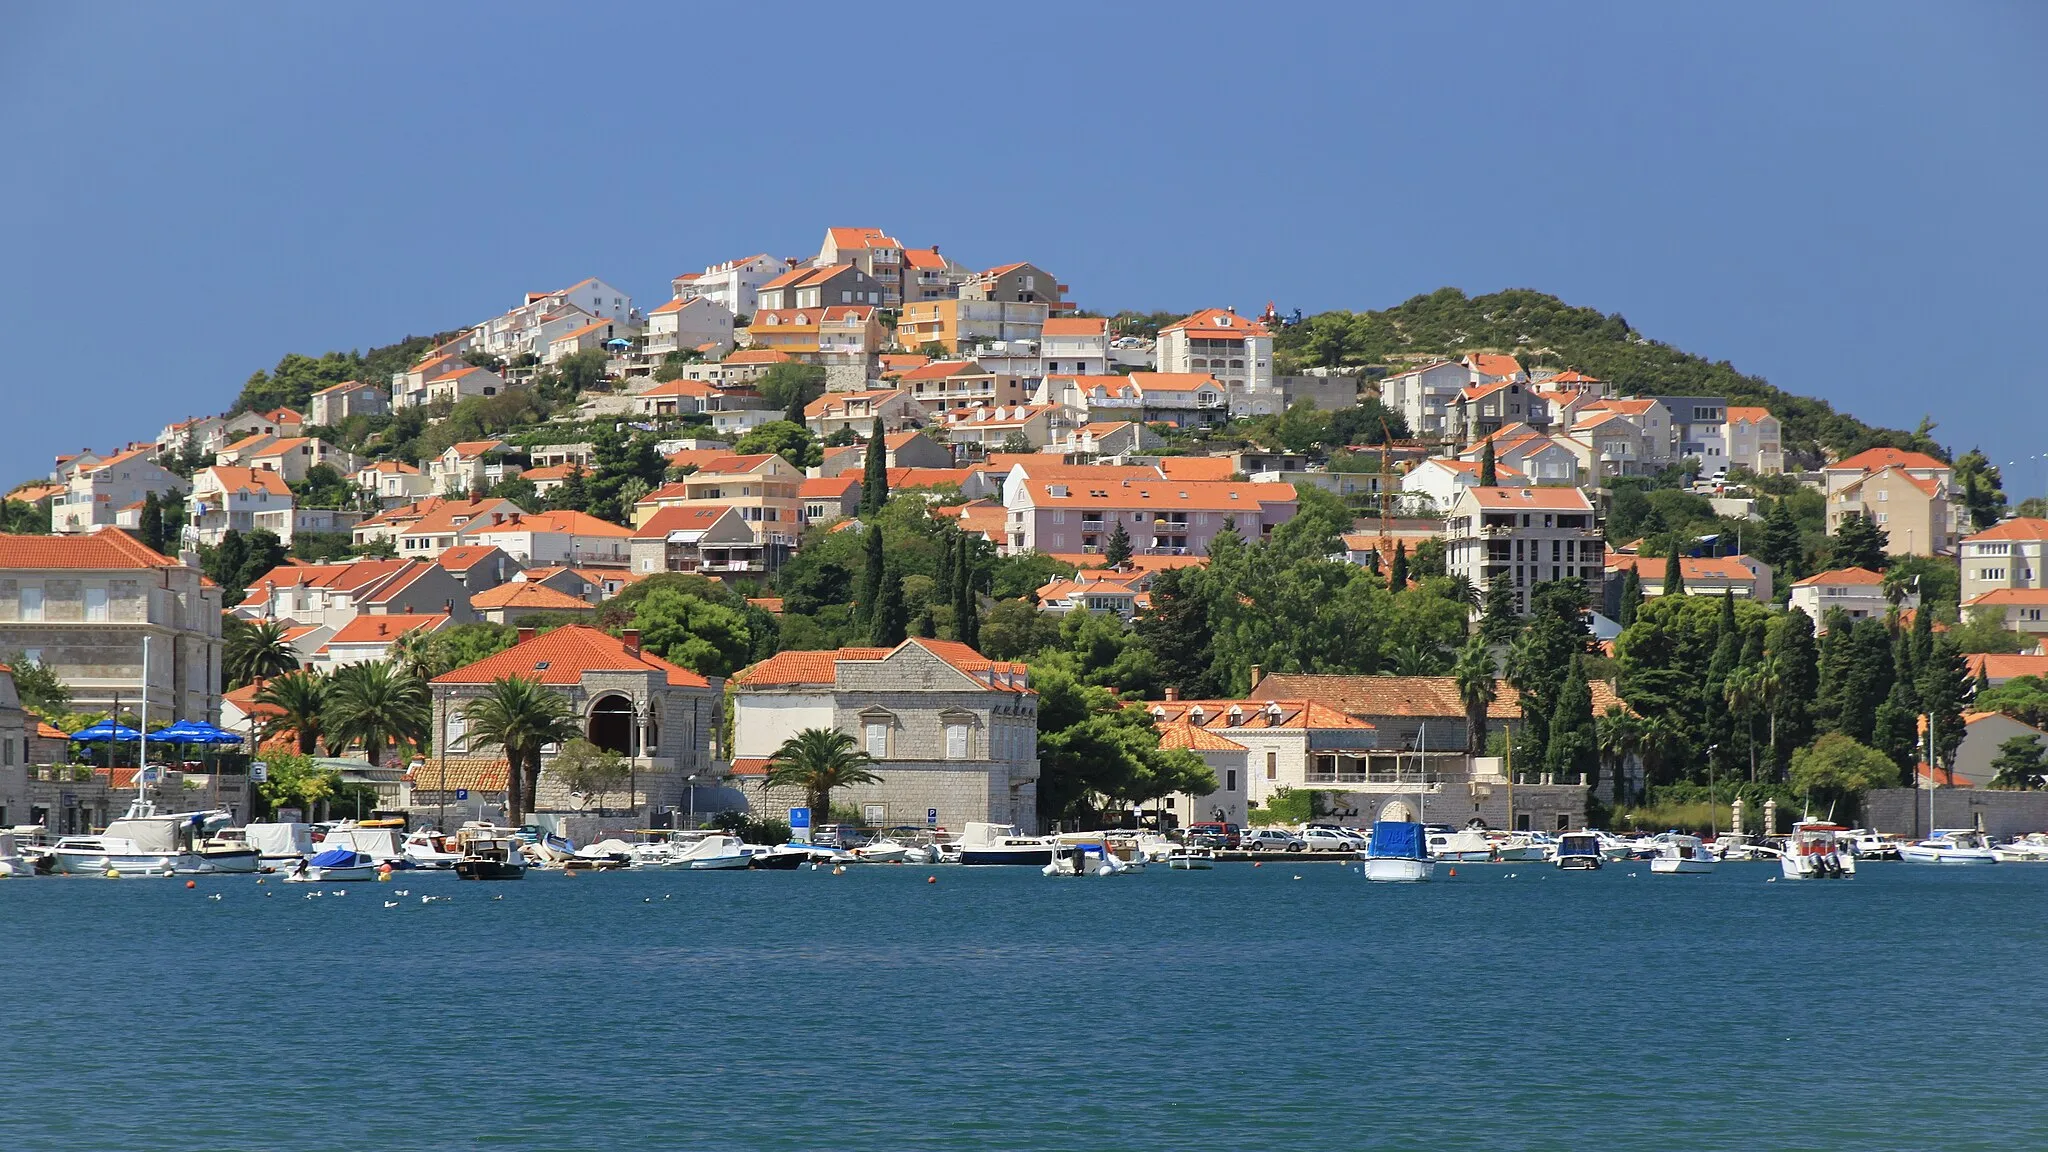 Photo showing: Houses in Lapad district seen from the main port. Dubrovnik, Dubrovnik-Neretva County, Croatia.